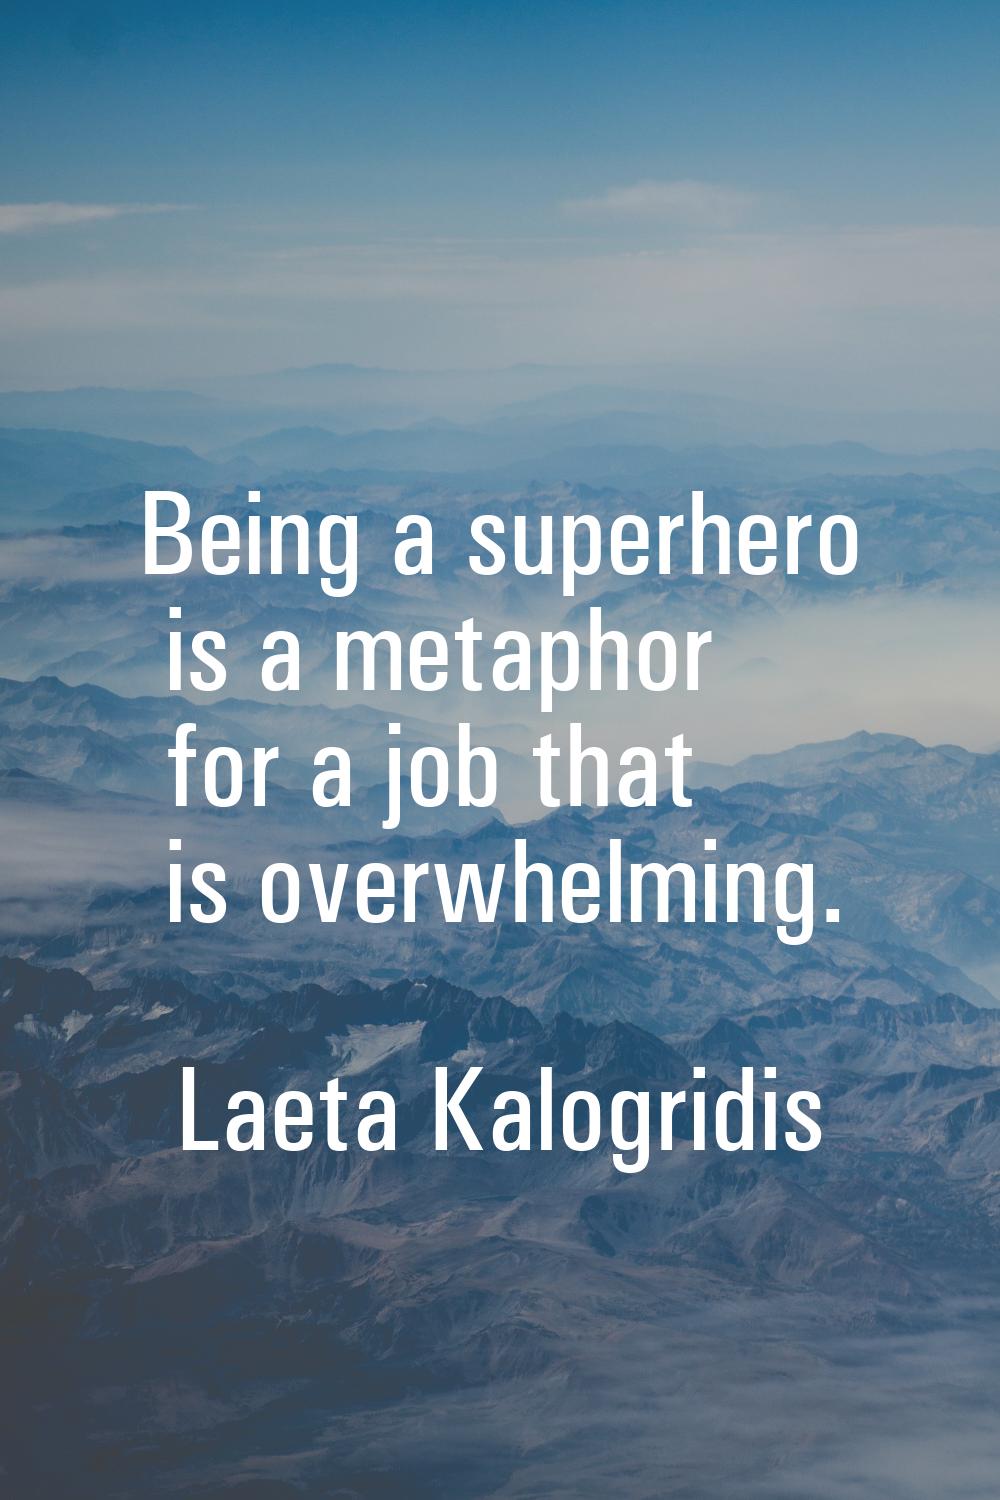 Being a superhero is a metaphor for a job that is overwhelming.